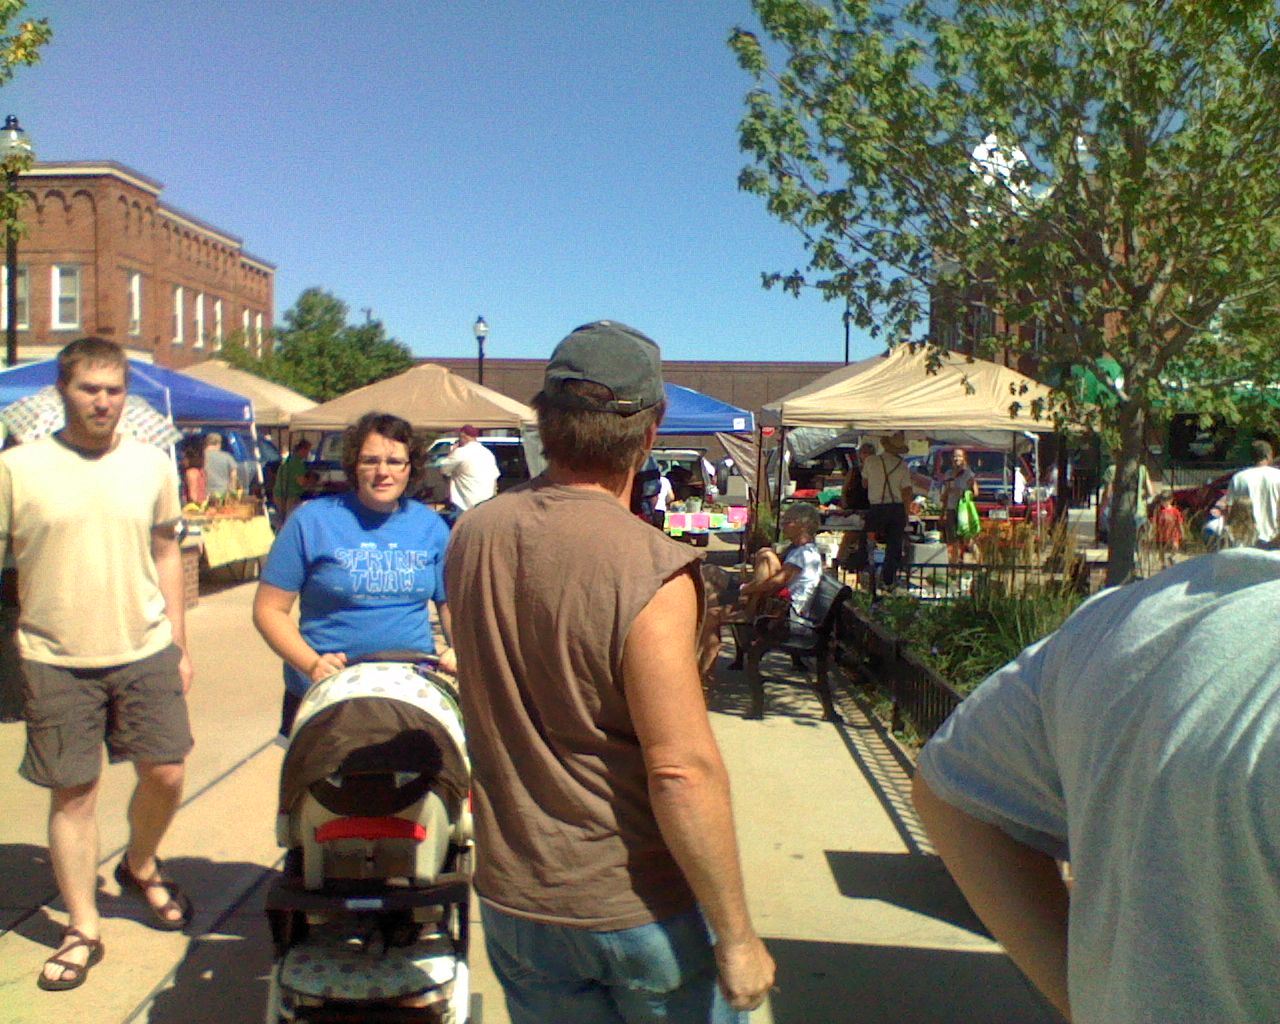 shopping at the public square in Stevens Point, Wisconsin